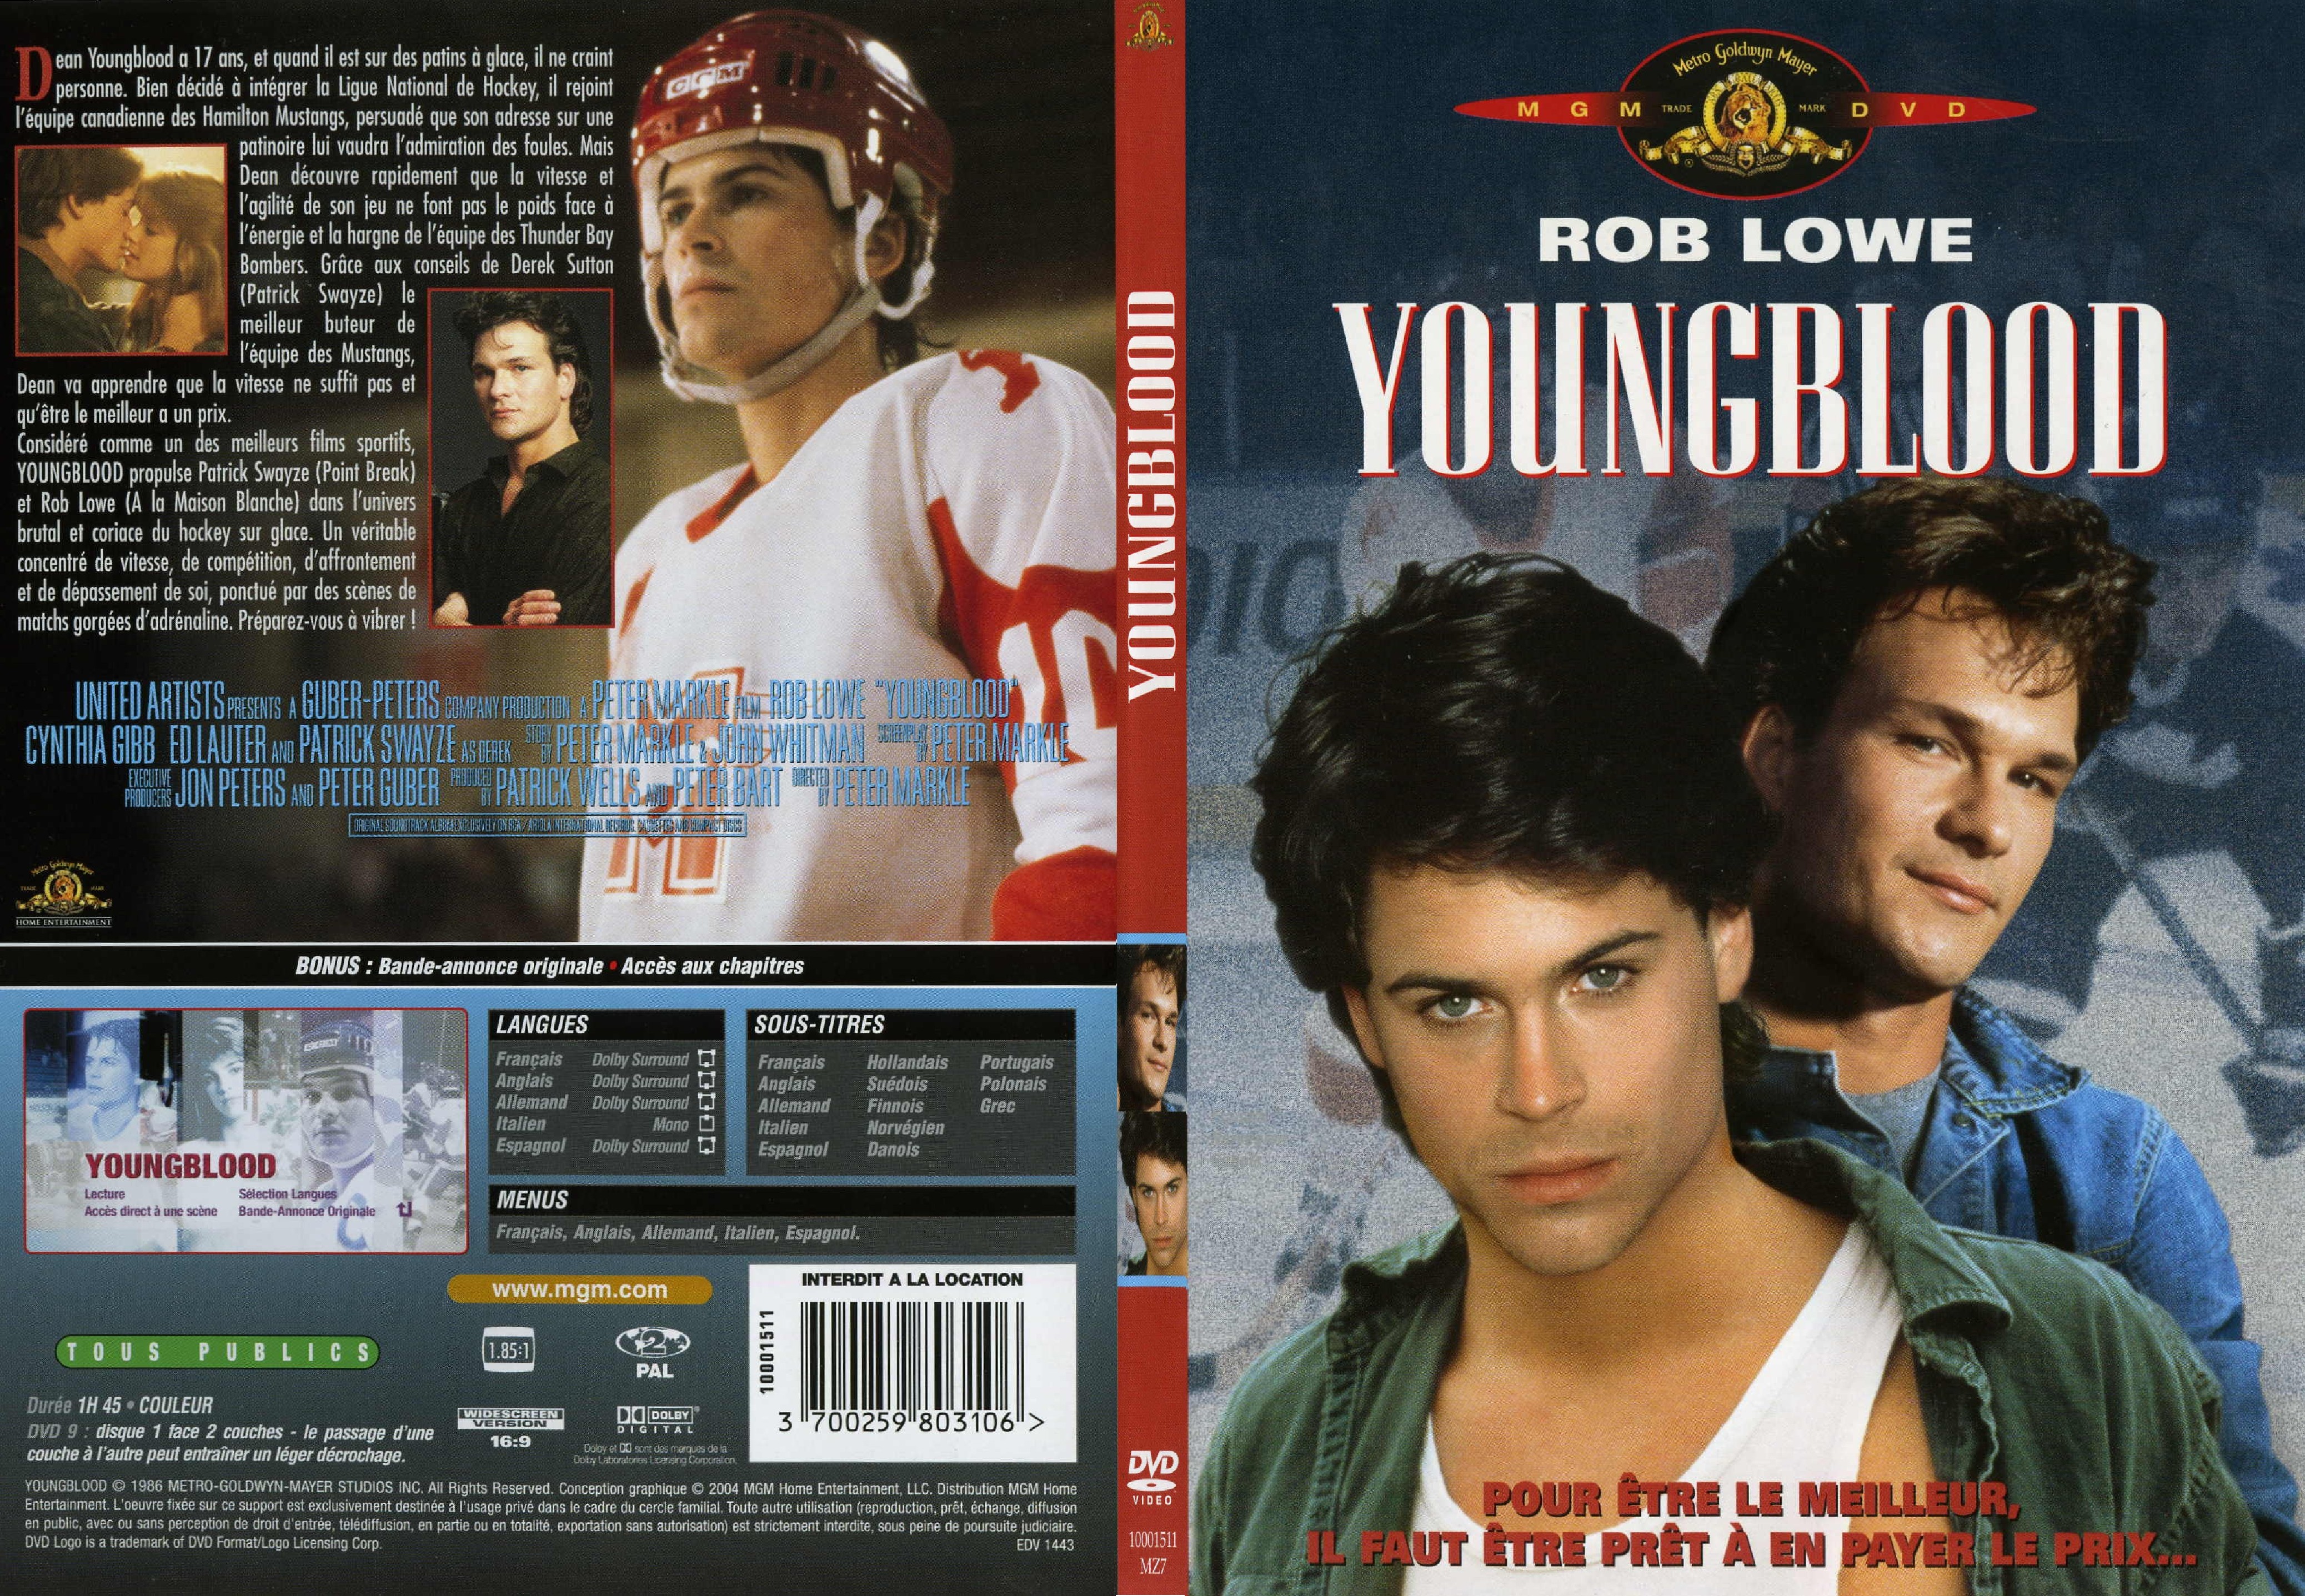 Jaquette DVD Youngblood - SLIM